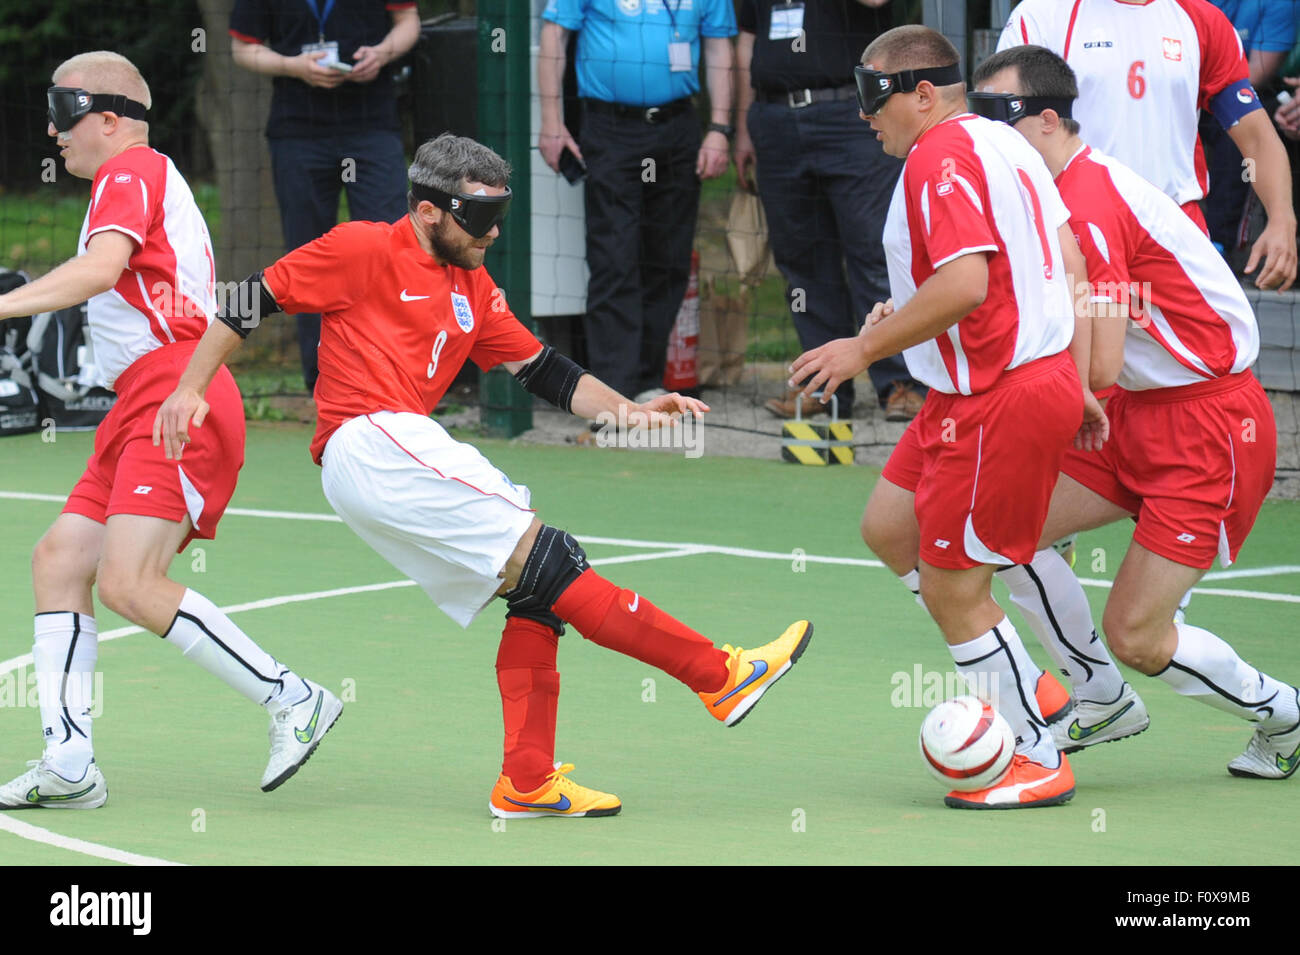 Hereford, UK. 22nd August, 2015. The IBSA Blind Football European Championships 2015 at Point 4, Hereford. England v Poland - England's Roy Turnham shoots. Credit:  James Maggs/Alamy Live News Stock Photo